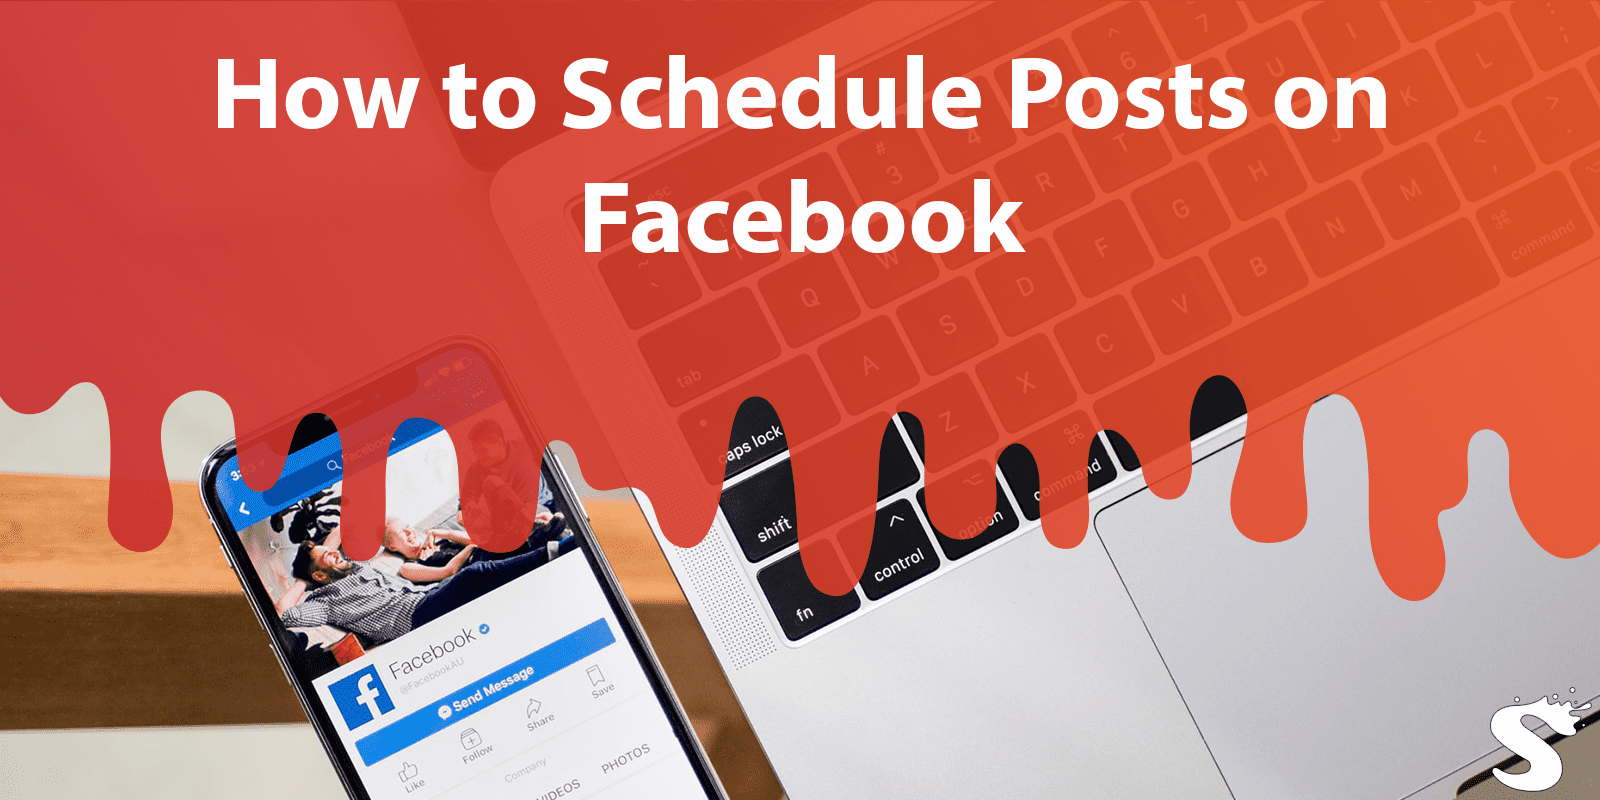 How to Schedule Posts on Facebook